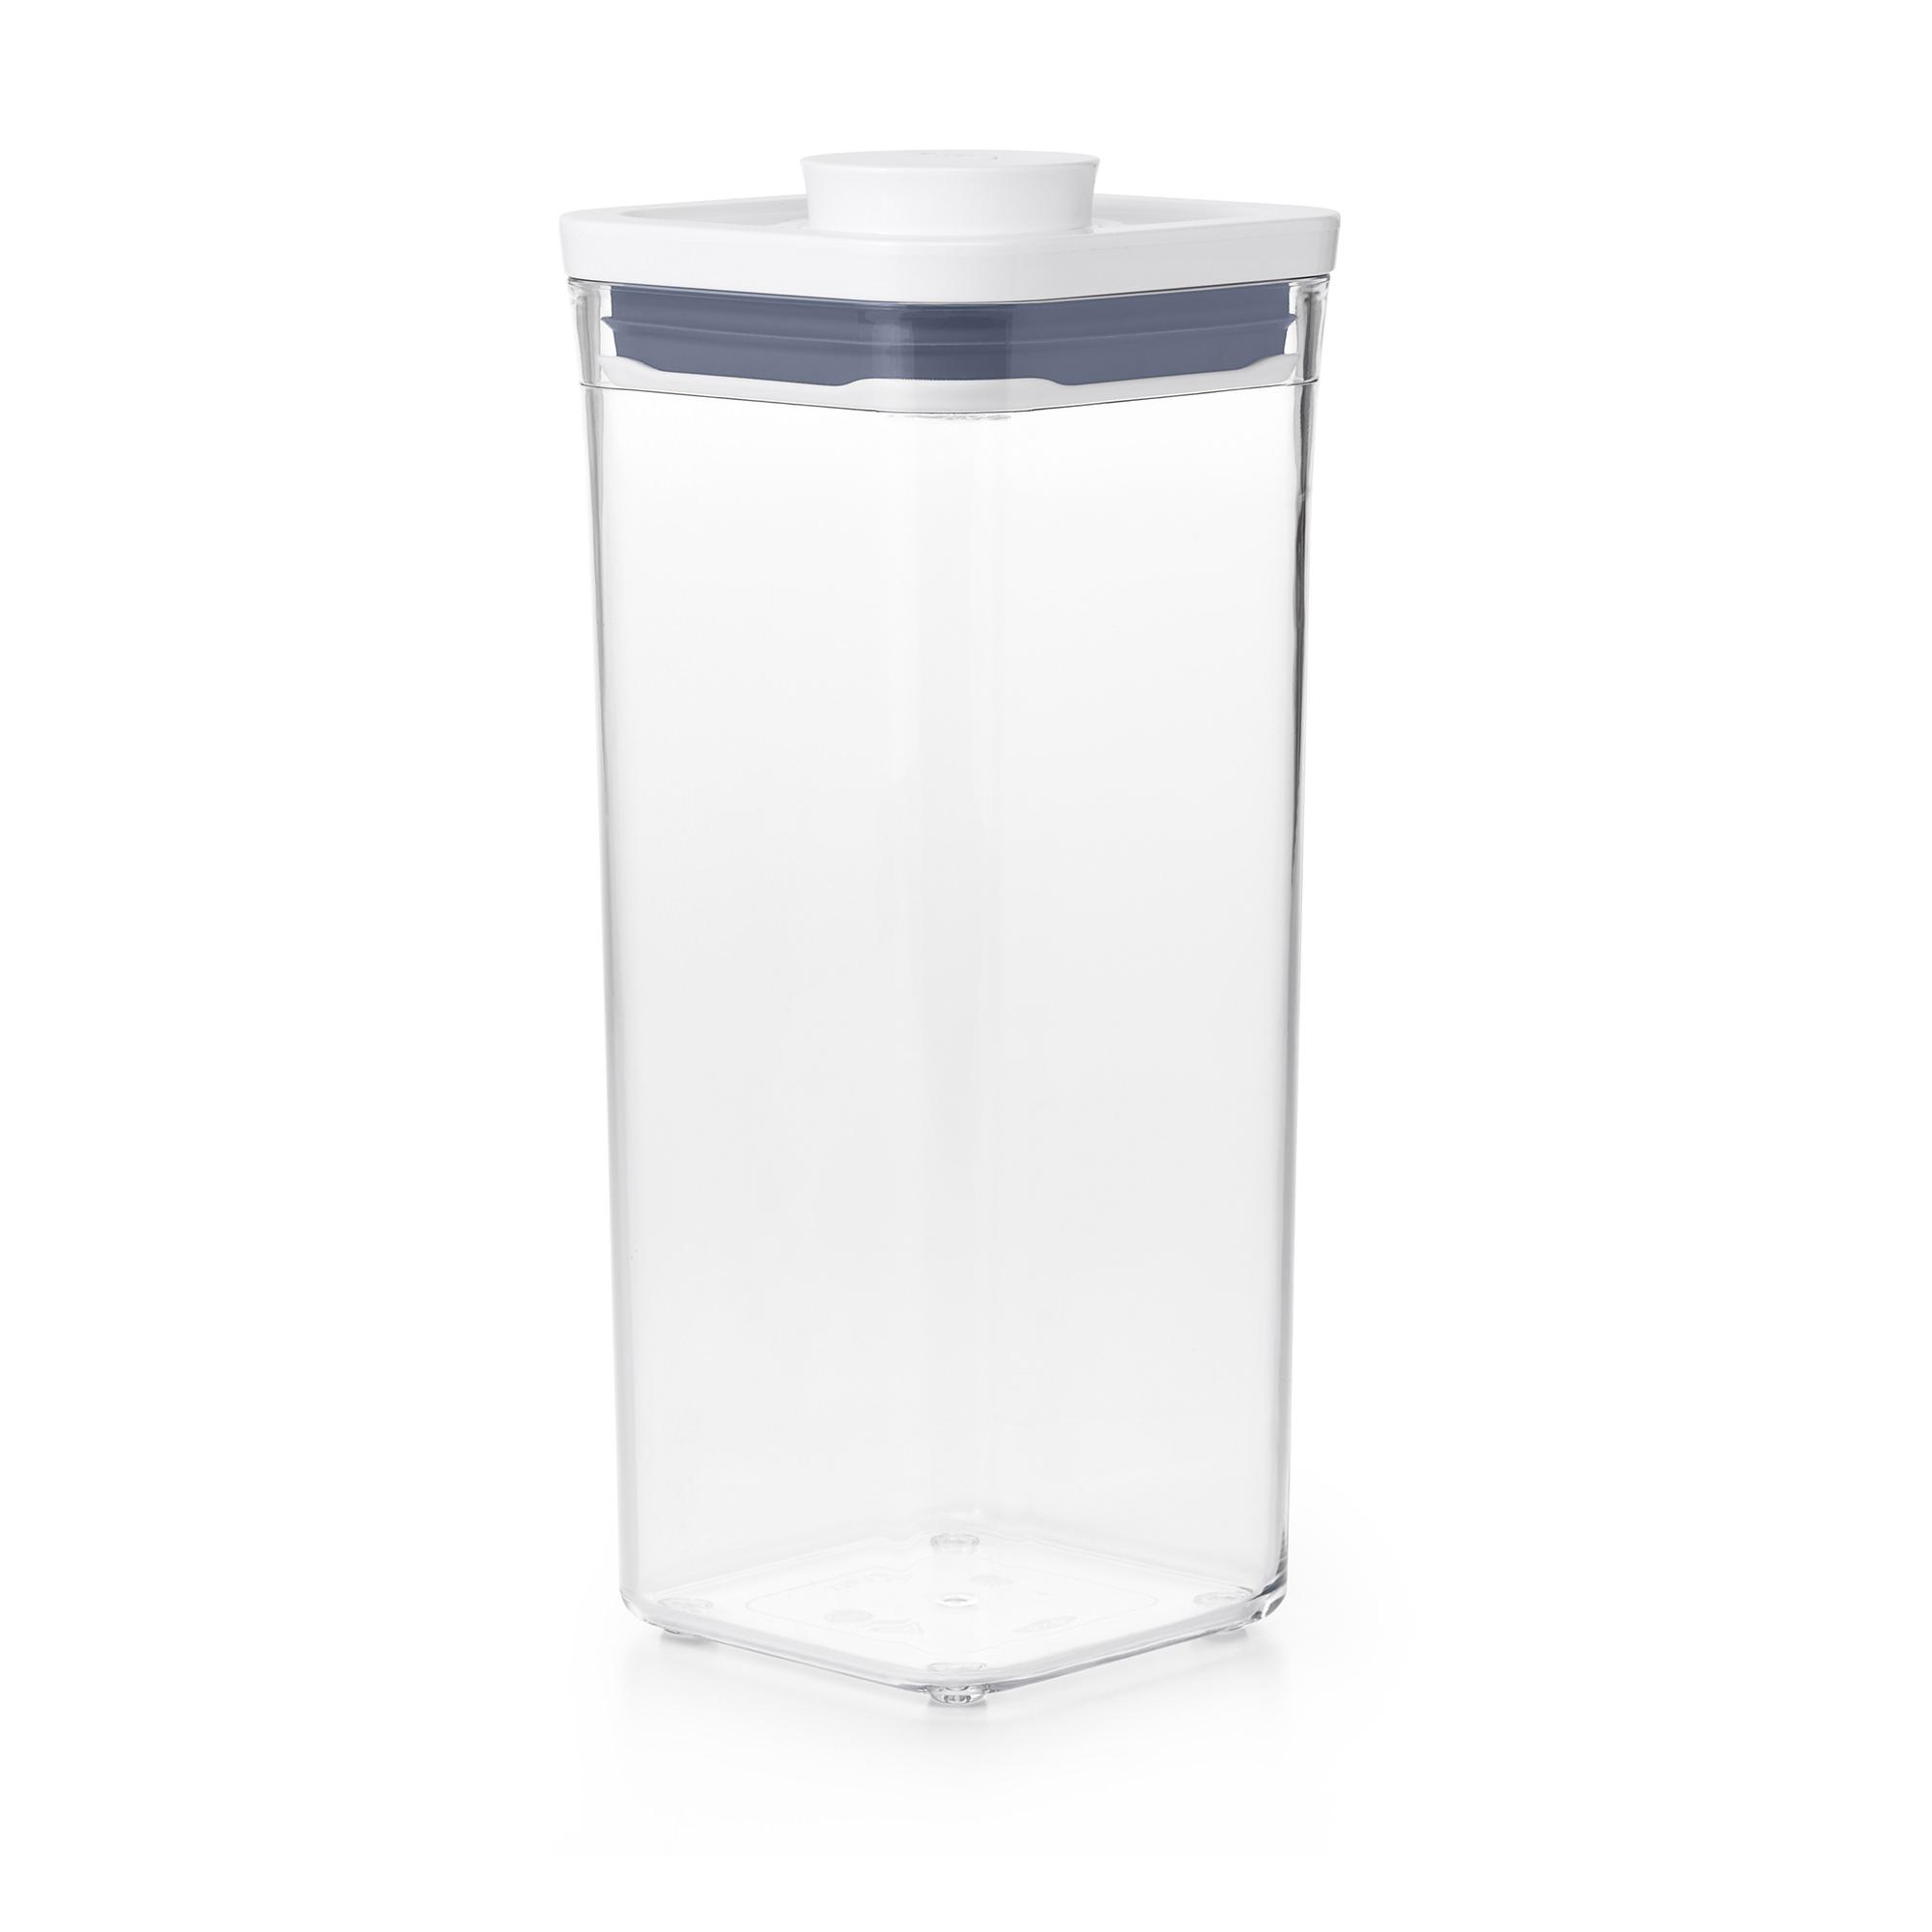 OXO Good Grips Square Pop 2.0 Container 1.6L Image 2